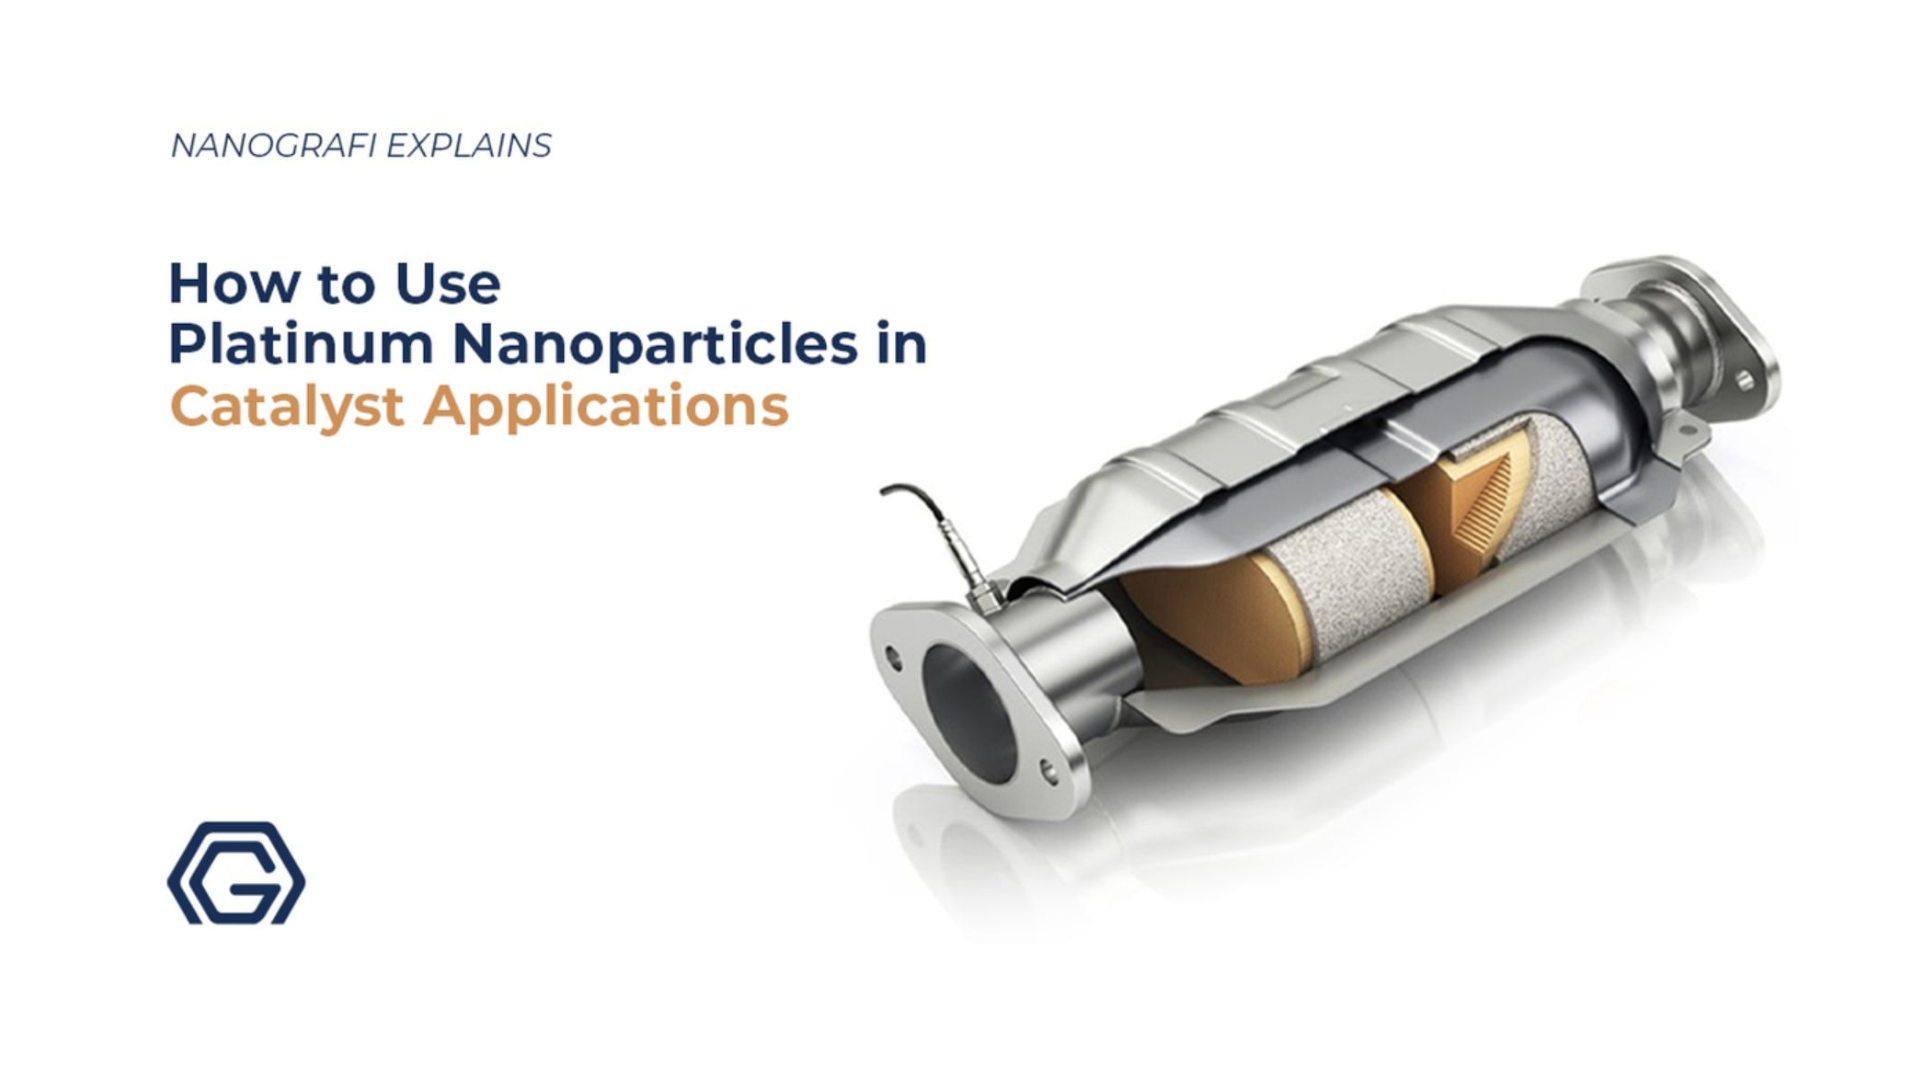 How to use platinum nanoparticles in catalyst applications